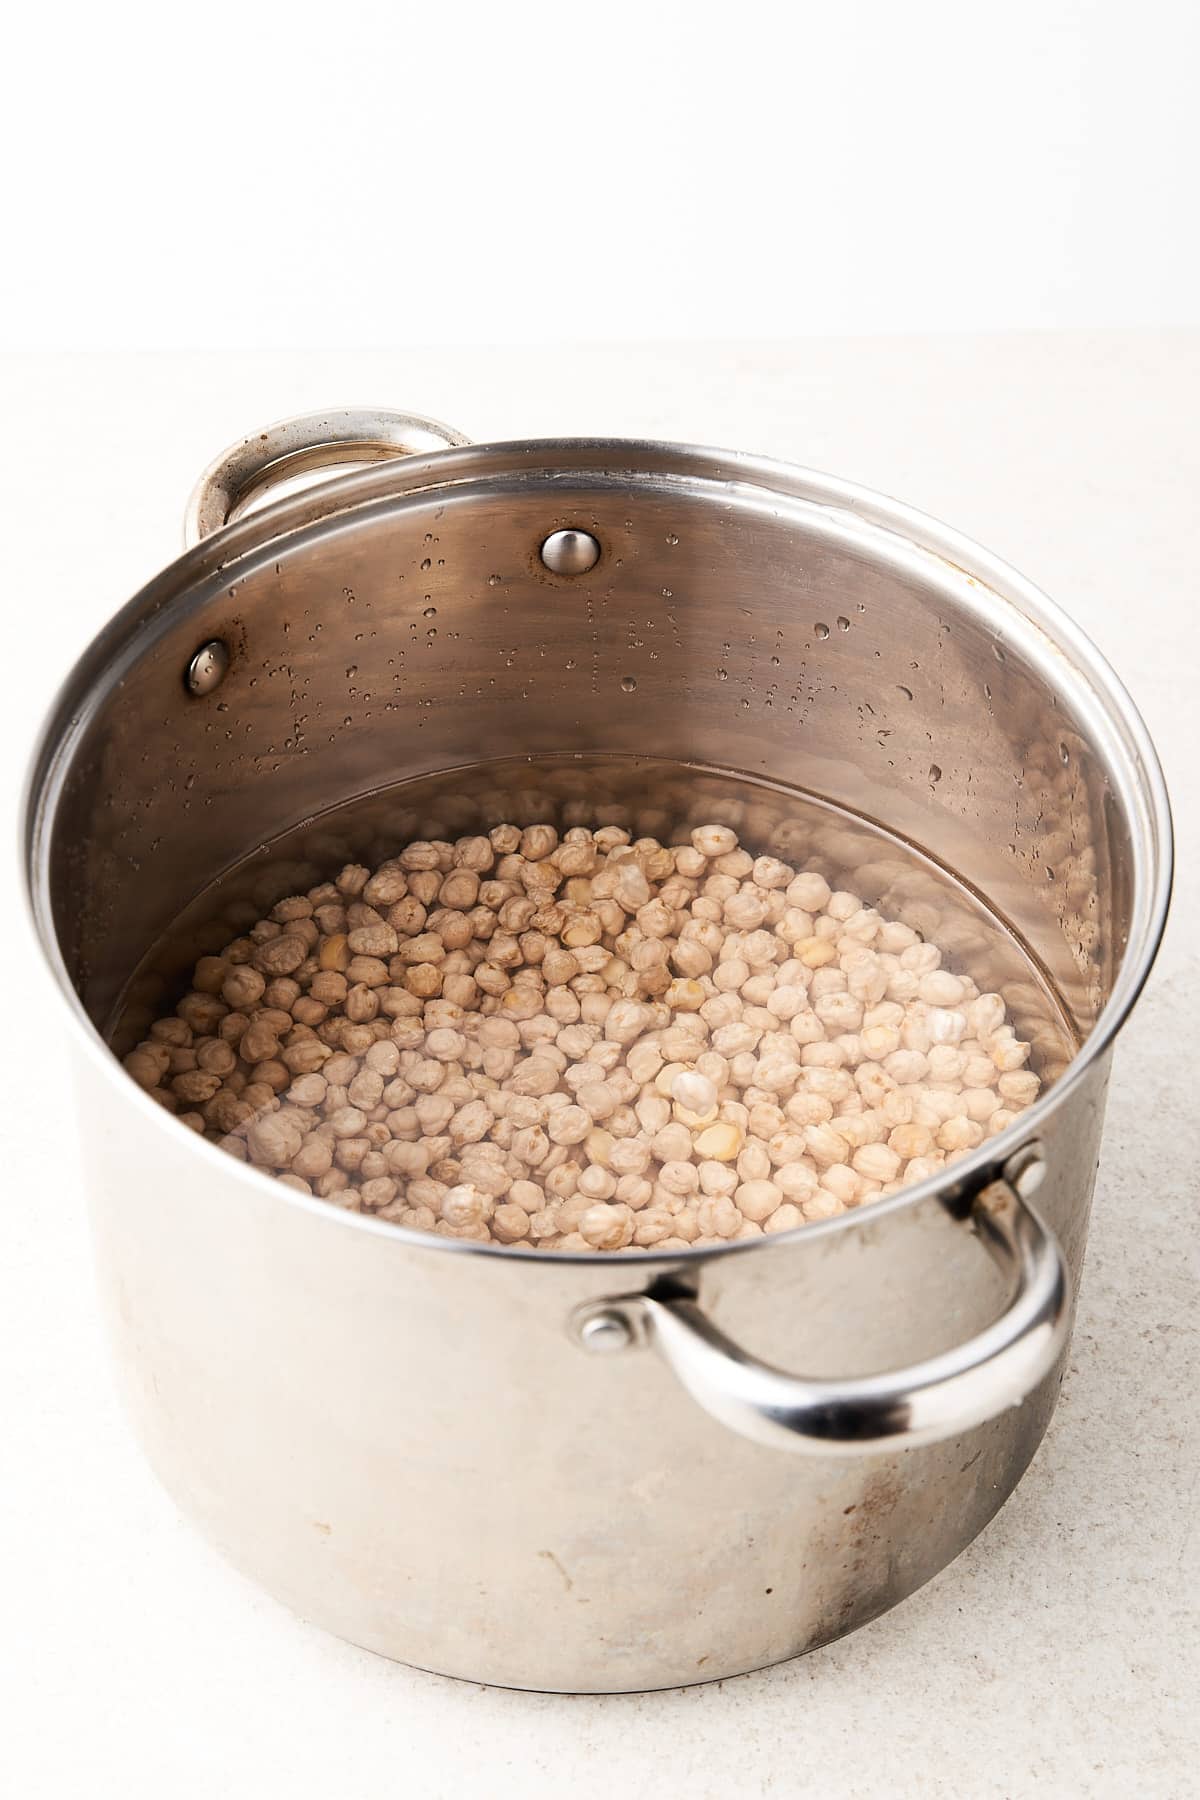 Chickpeas in a stockpot.